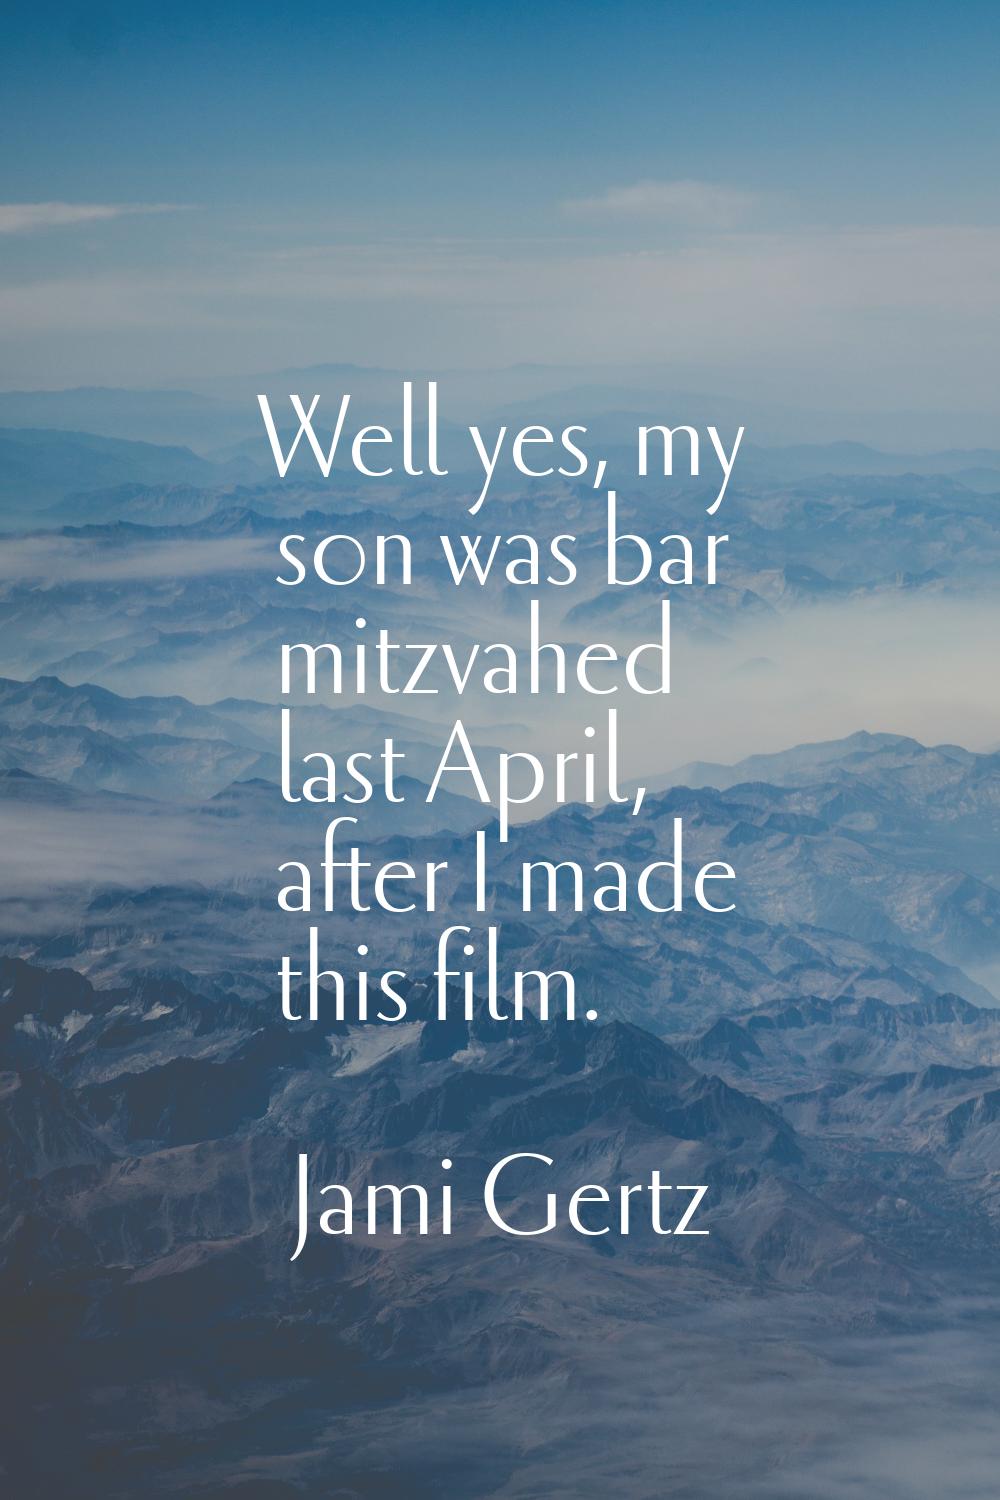 Well yes, my son was bar mitzvahed last April, after I made this film.